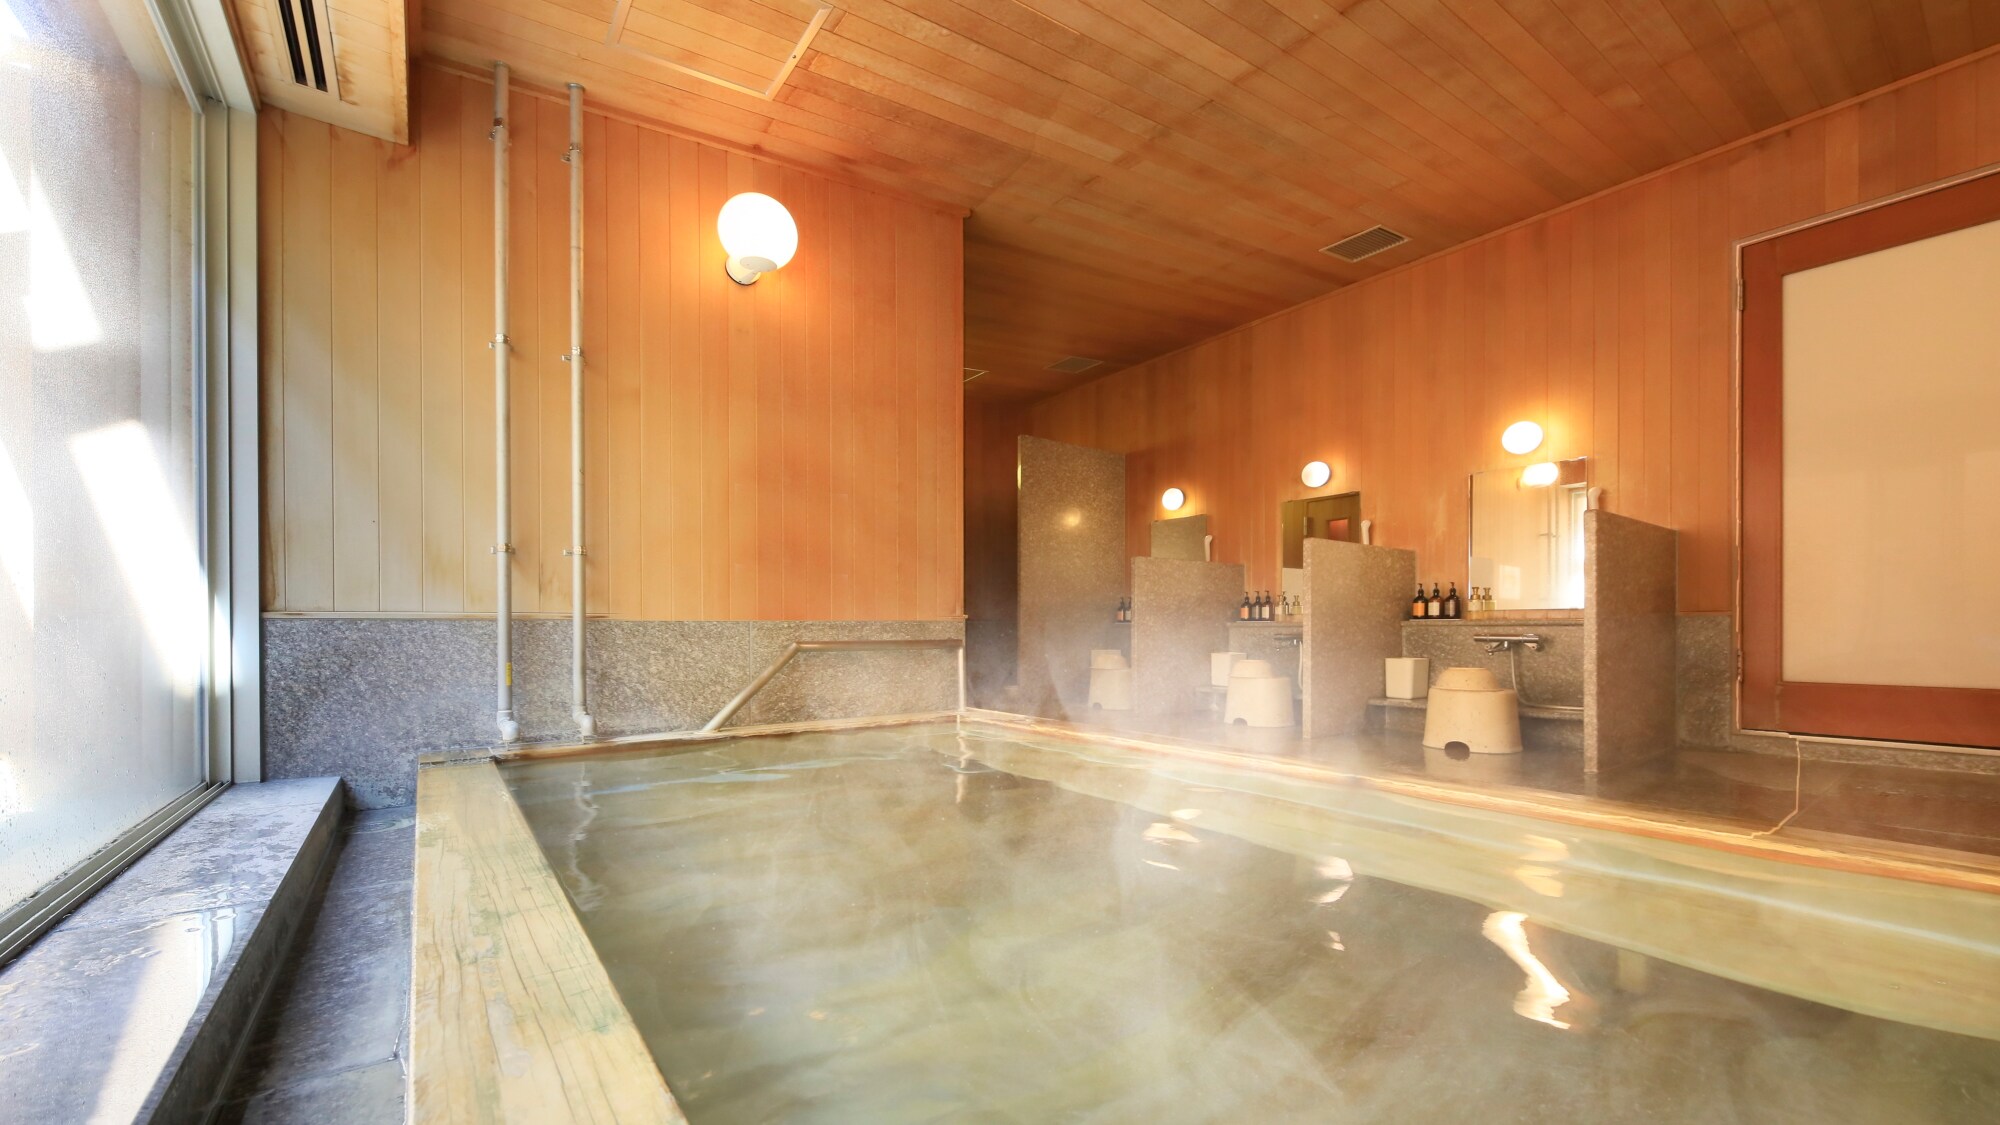 Large communal bath (men's bath) | Please take a rest in the bathtub where you can feel the warmth of wood.